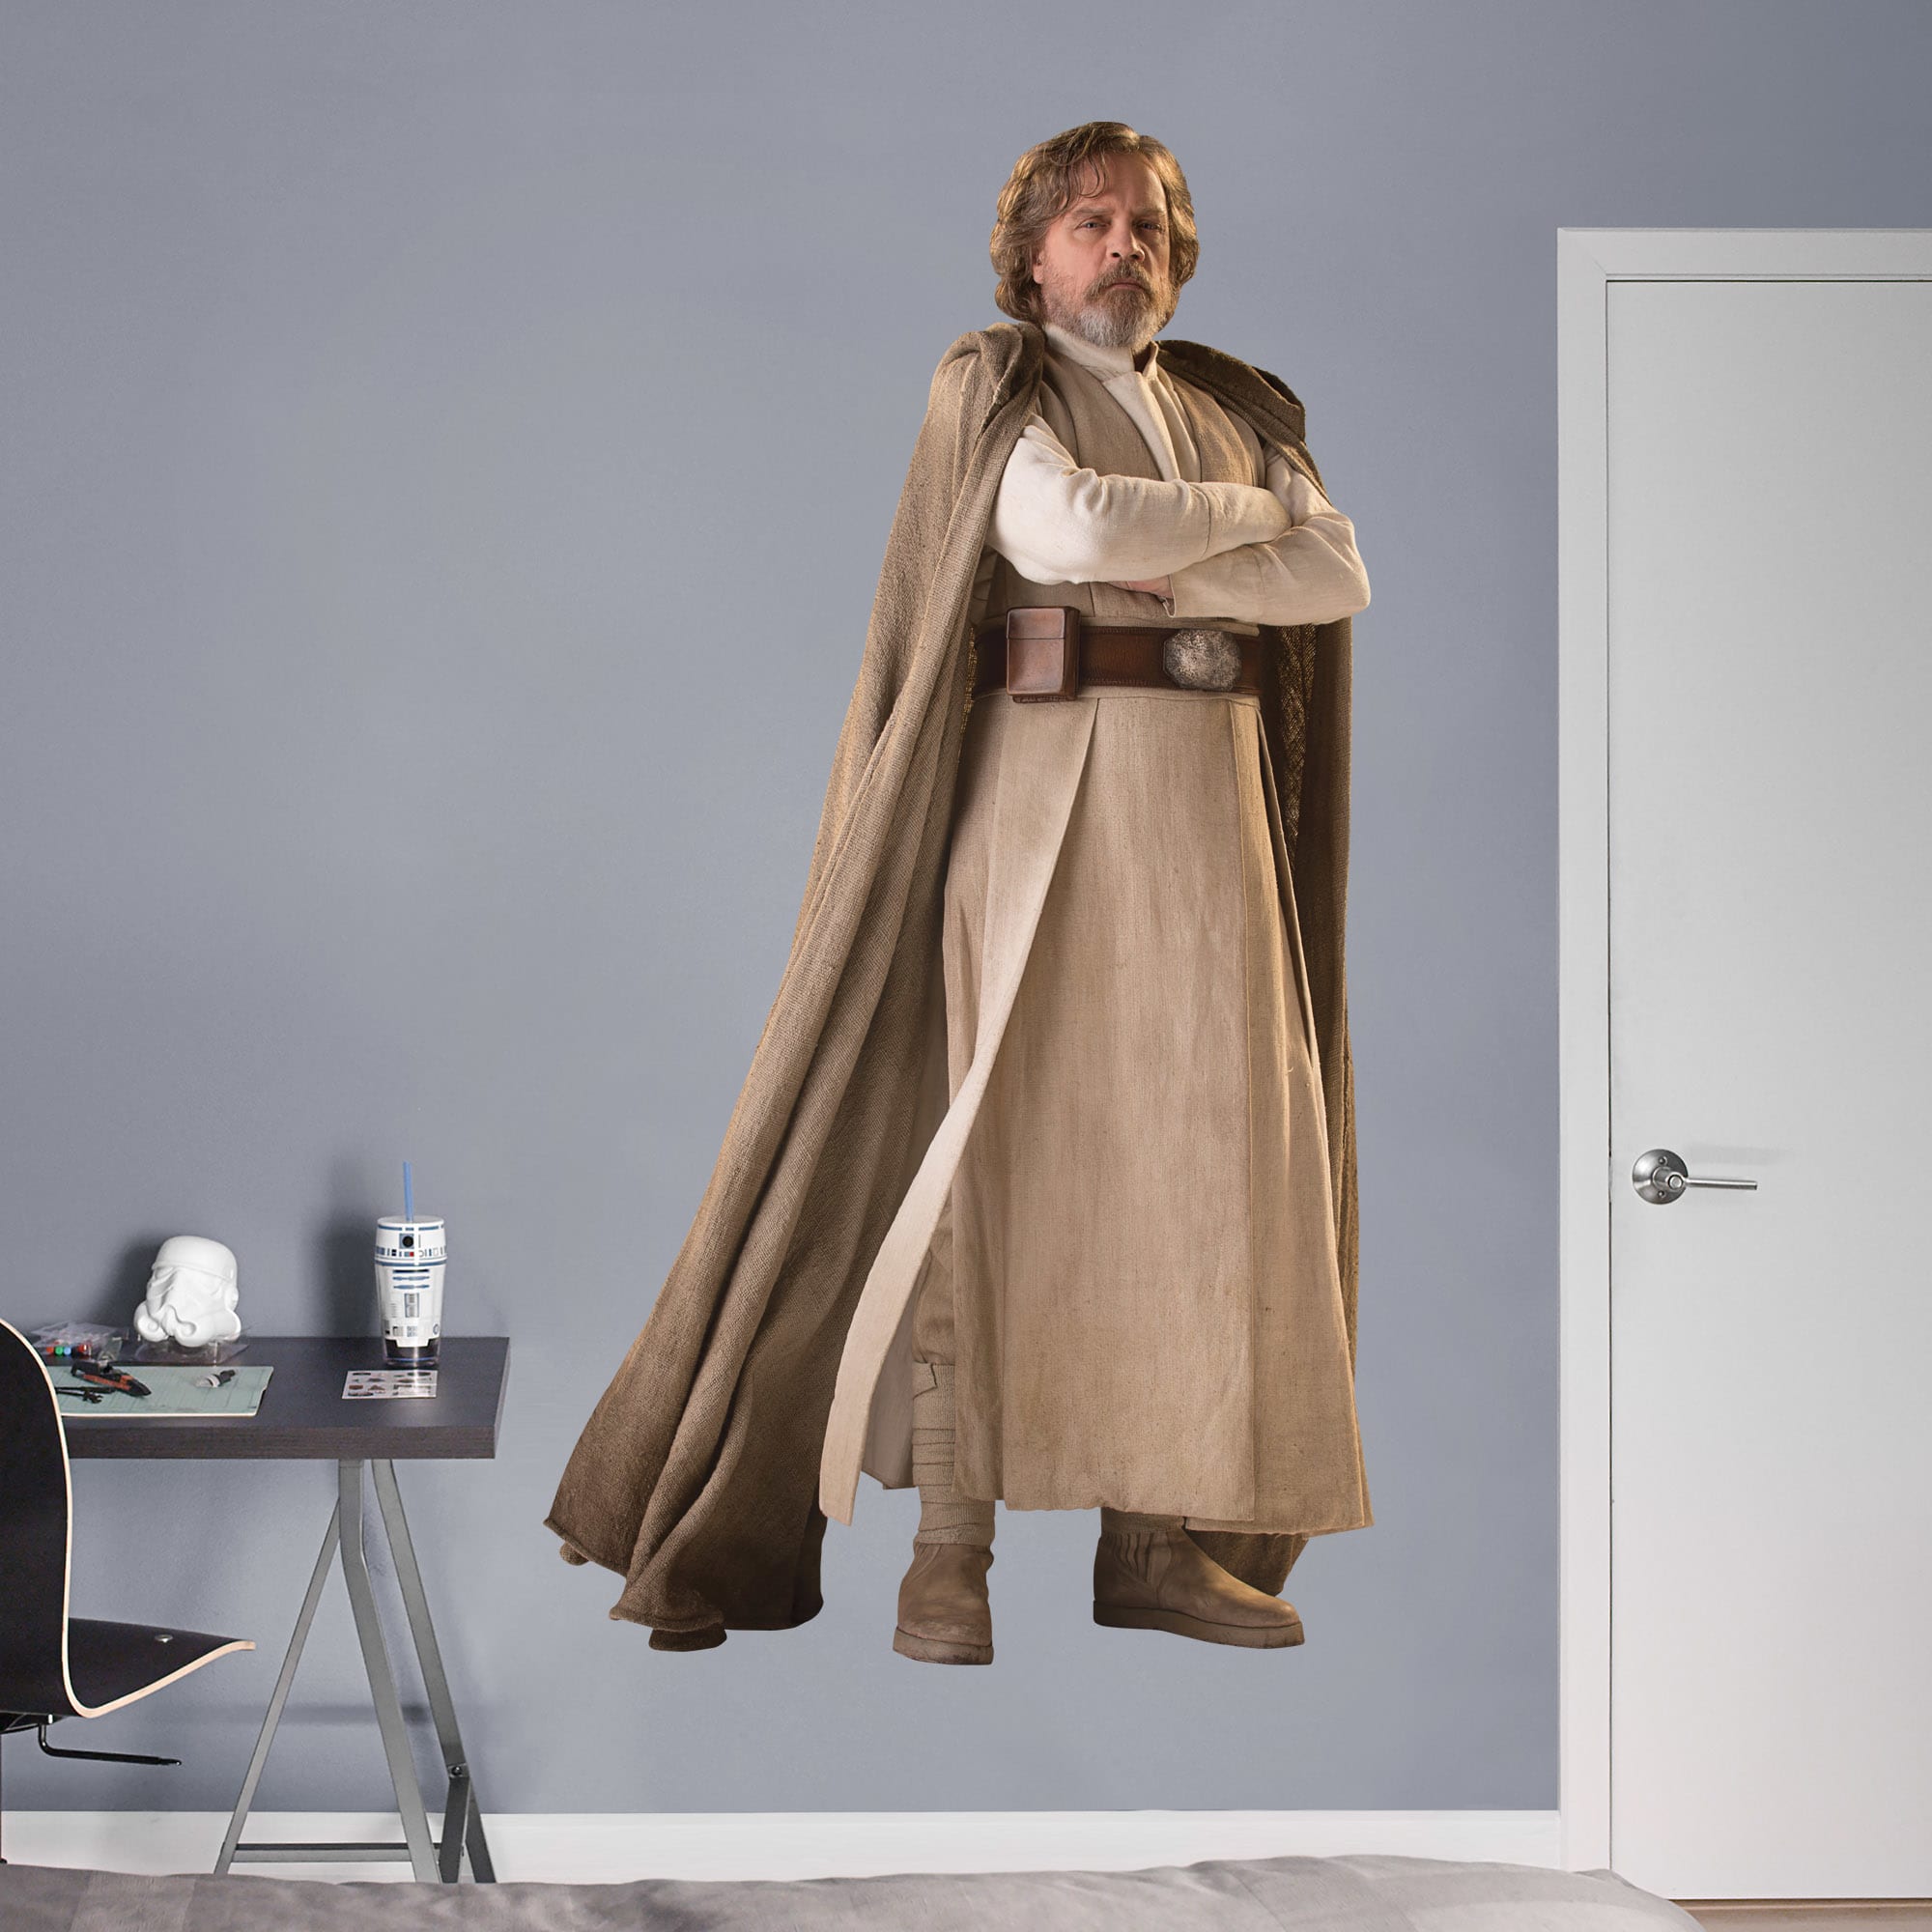 Luke Skywalker: Jedi Master - Officially Licensed Removable Wall Decal Life-Size Character + 2 Decals (40"W x 75"H) by Fathead |